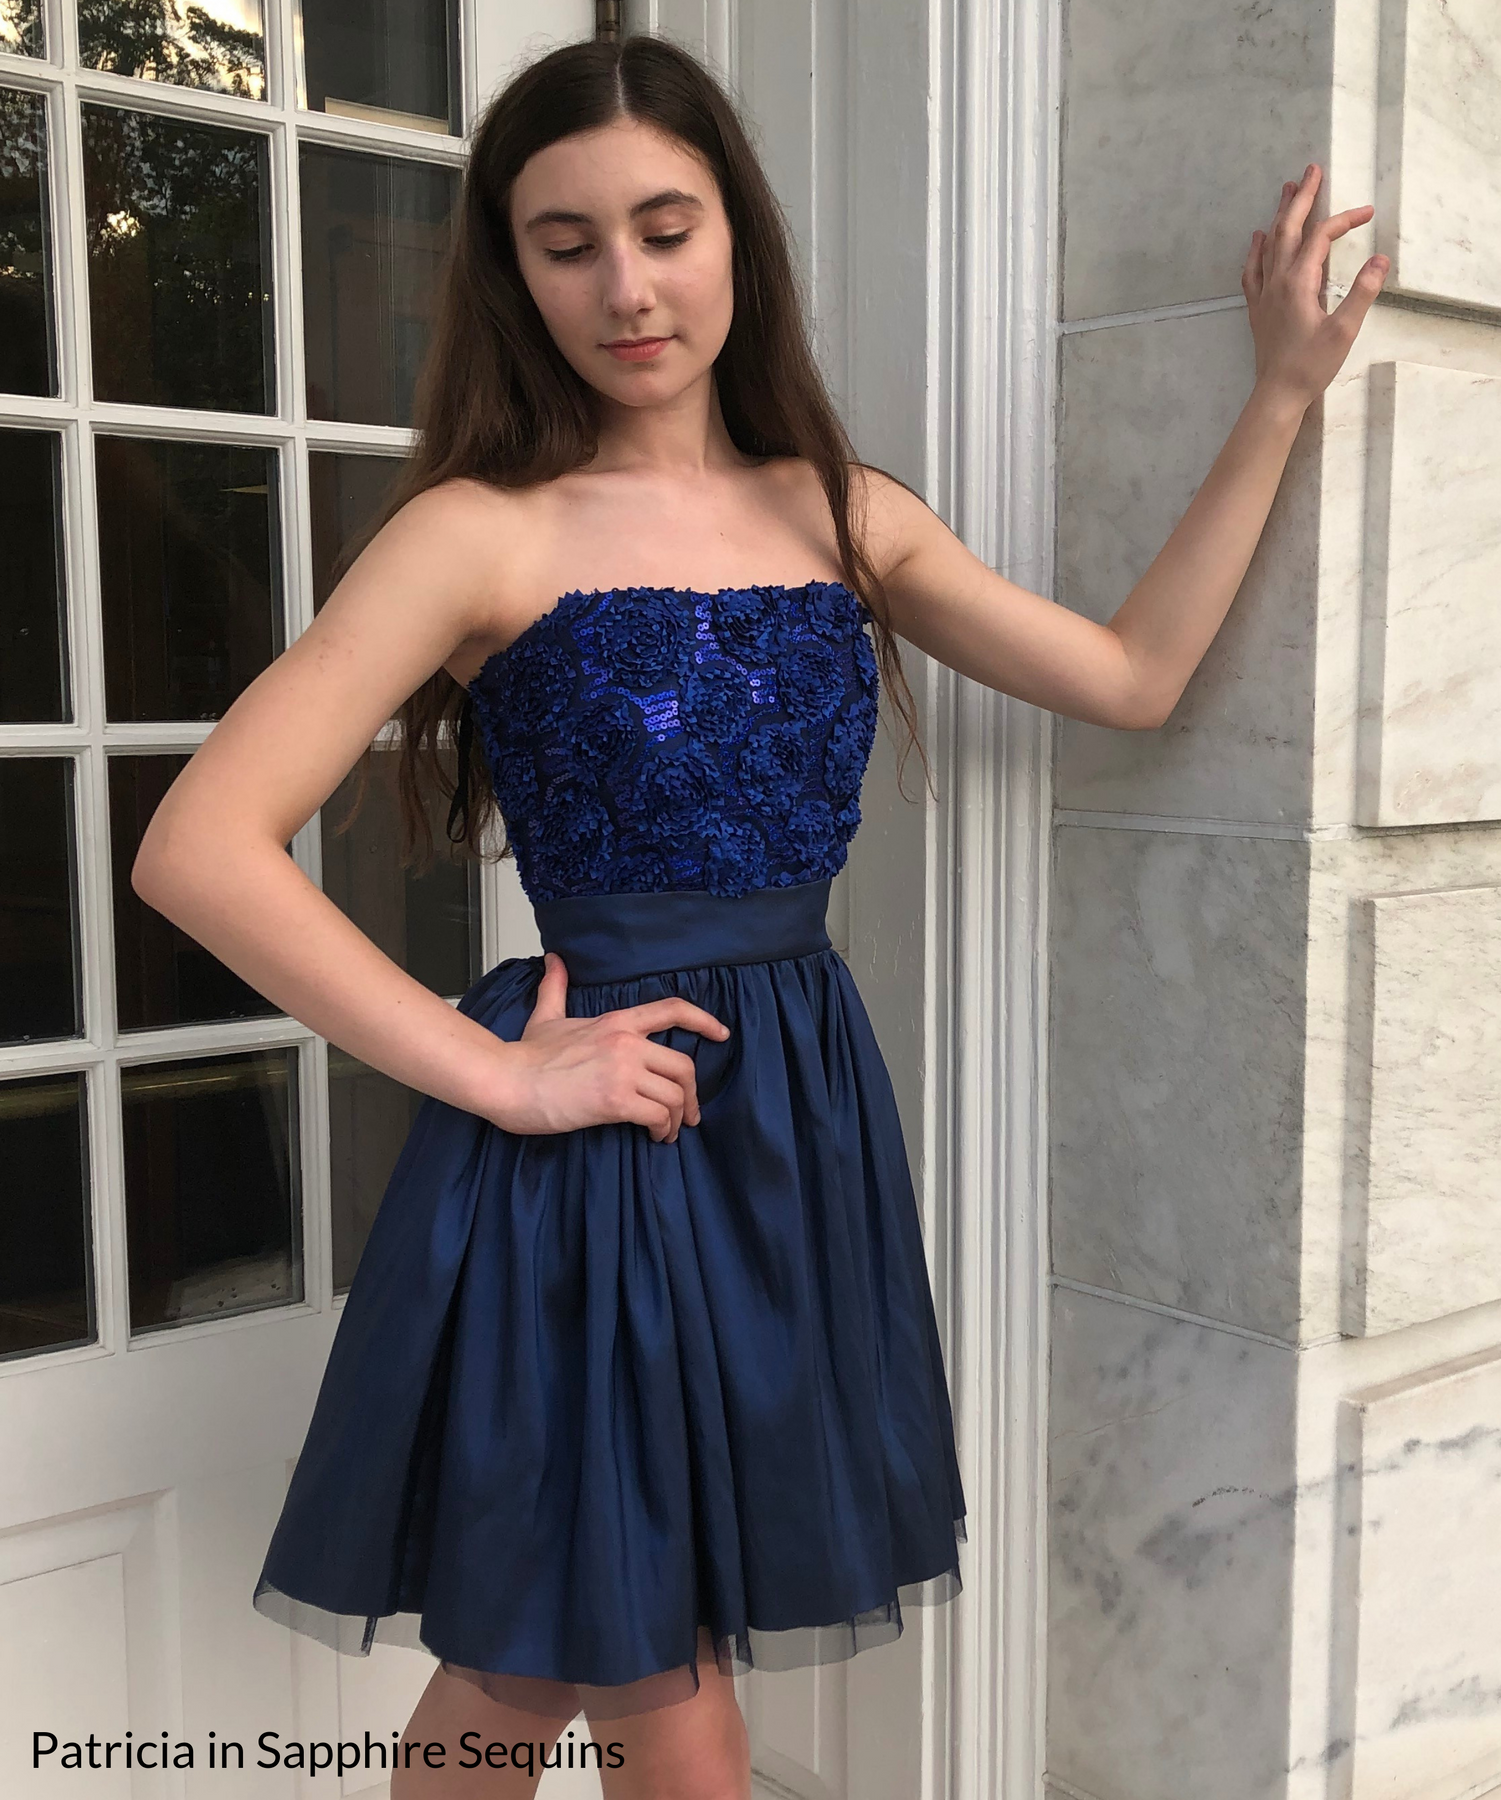 Party dresses for tweens and teens 8-16 years old | Stella M'Lia